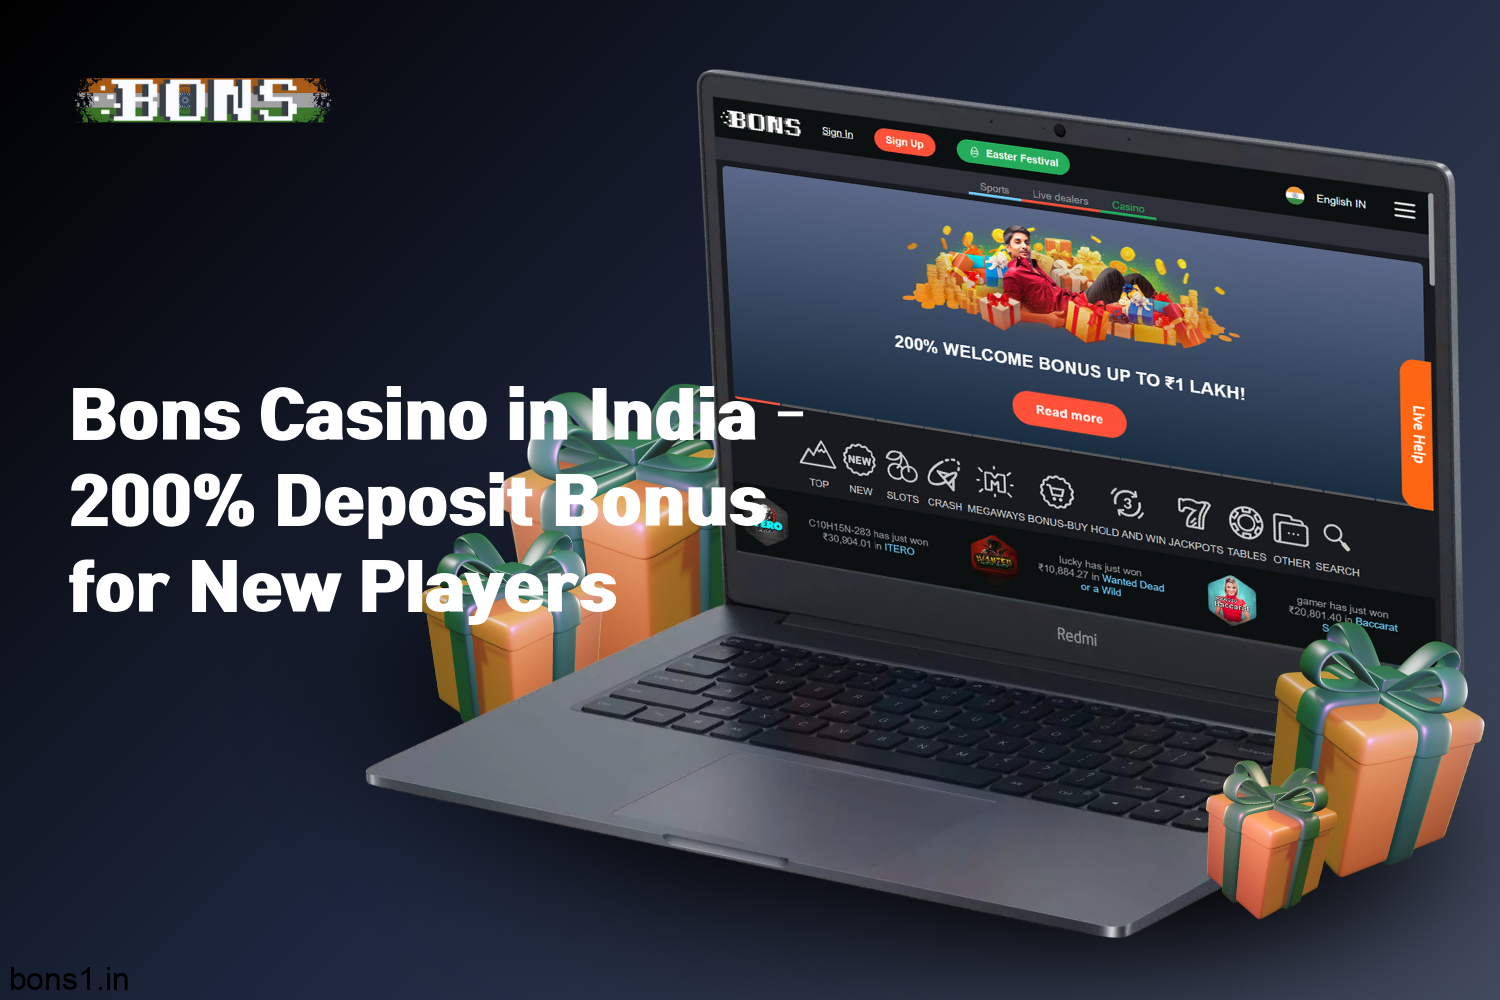 Bons Casino provides new players in India with a 200% deposit bonus